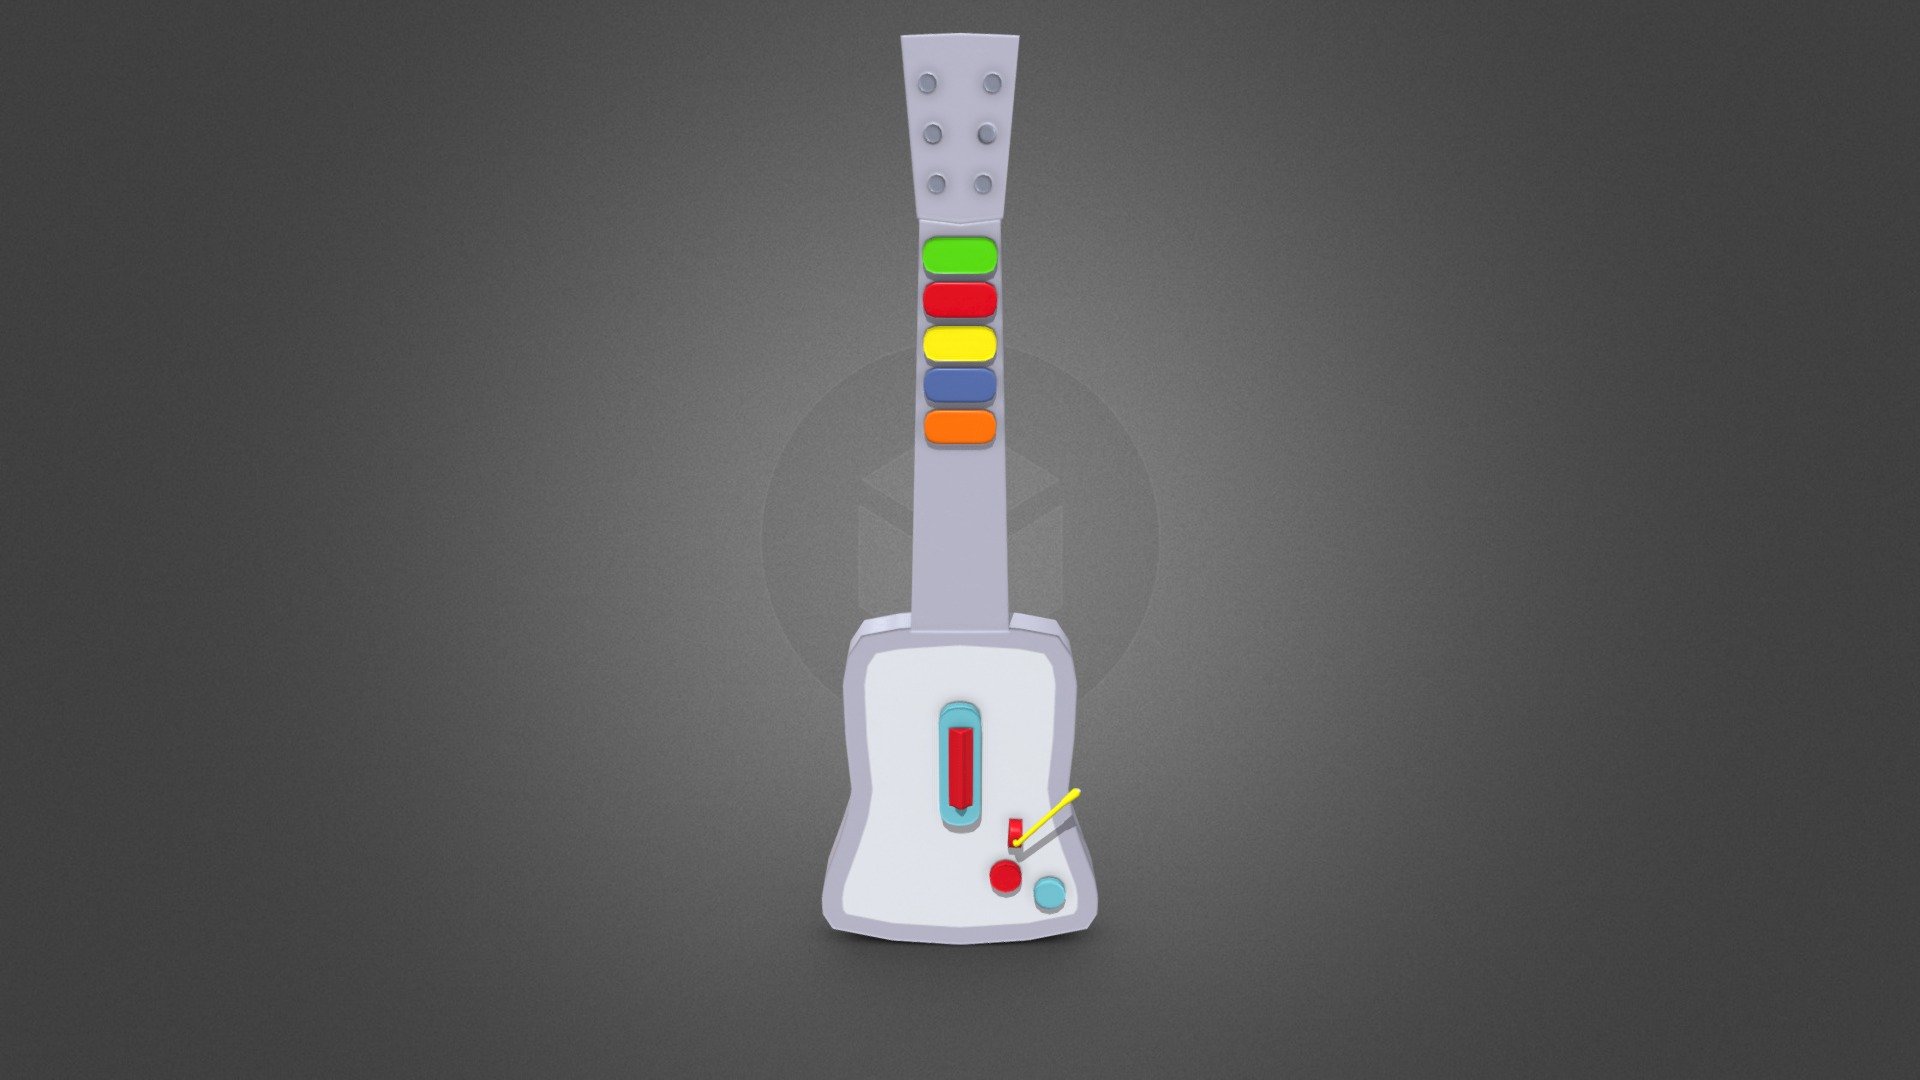 Guitar Controller based in the chapter &ldquo;Guitar Queer-O